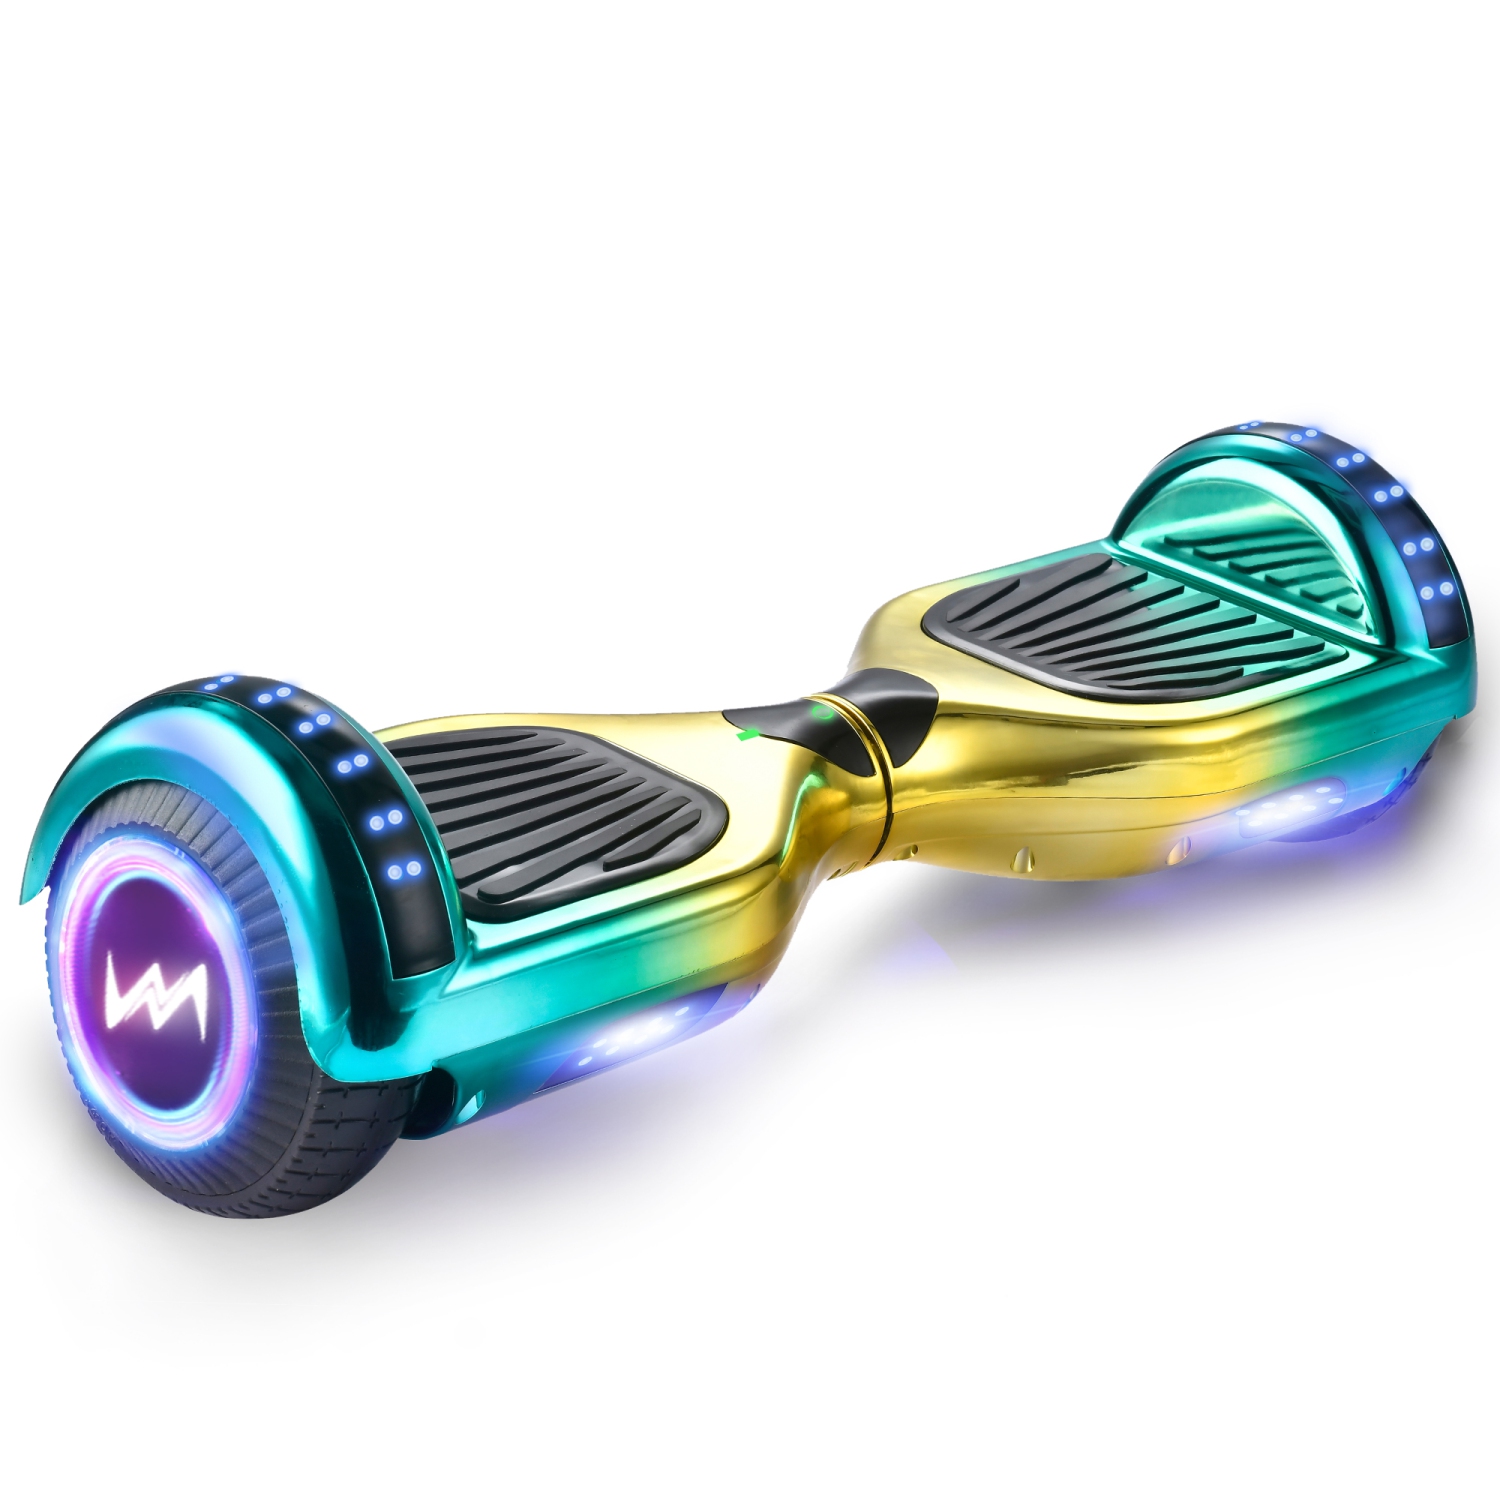 WEELMOTION Chrome Lemon Hoverboard with Music Speaker and LED Front Lights, Strap Lights, Shining Whees All Terrain 6.5" UL 2272 Certified Hoverboard with free hover board bag